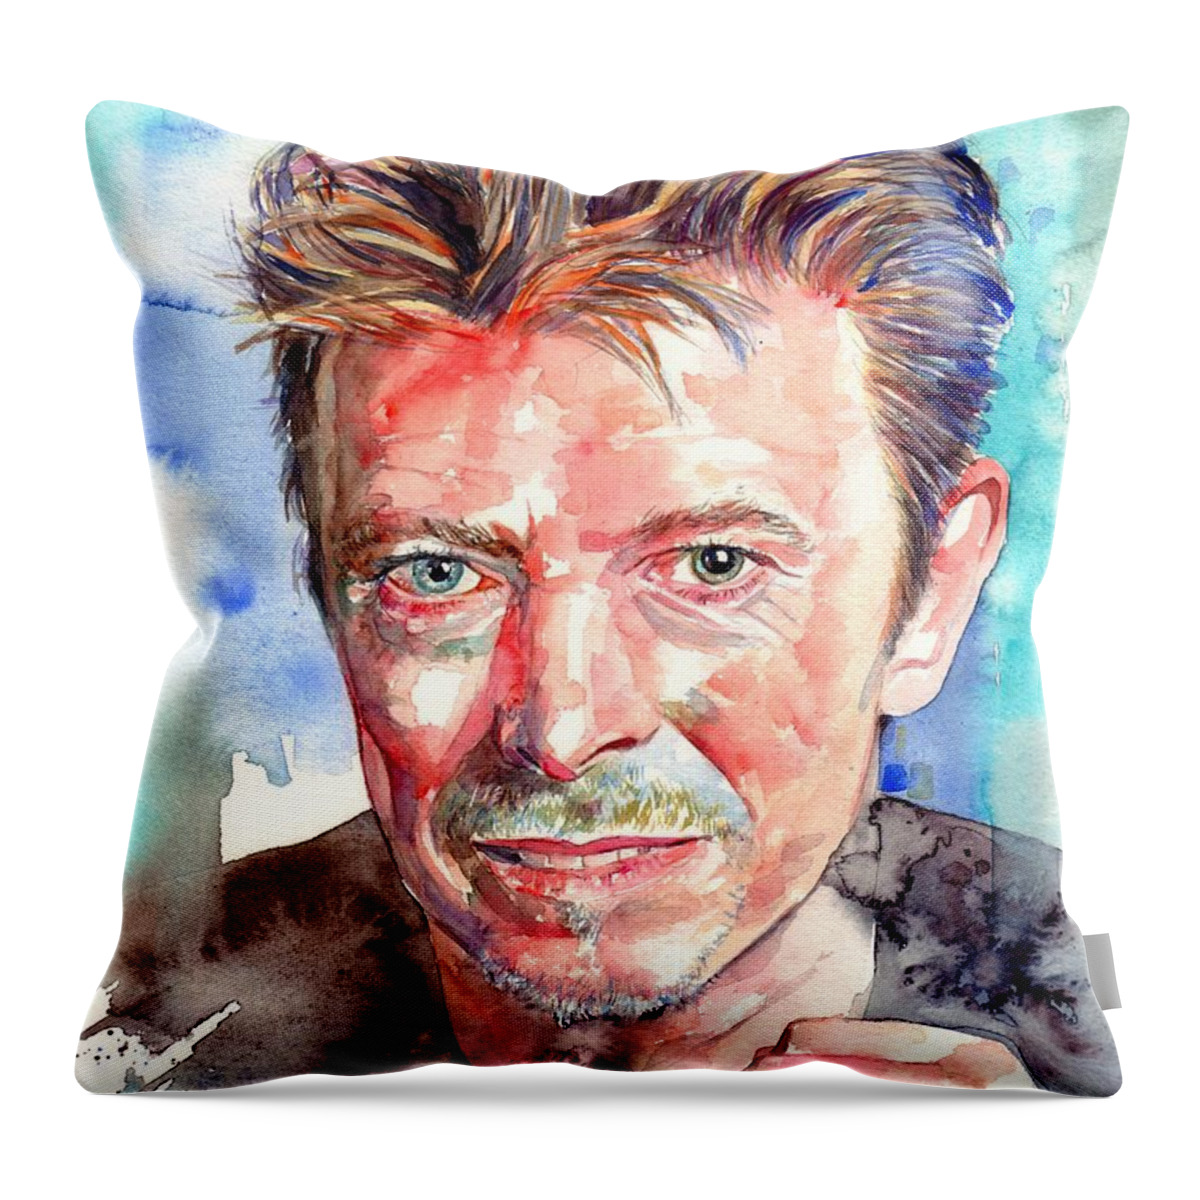 David Bowie Throw Pillow featuring the painting David Bowie Portrait by Suzann Sines